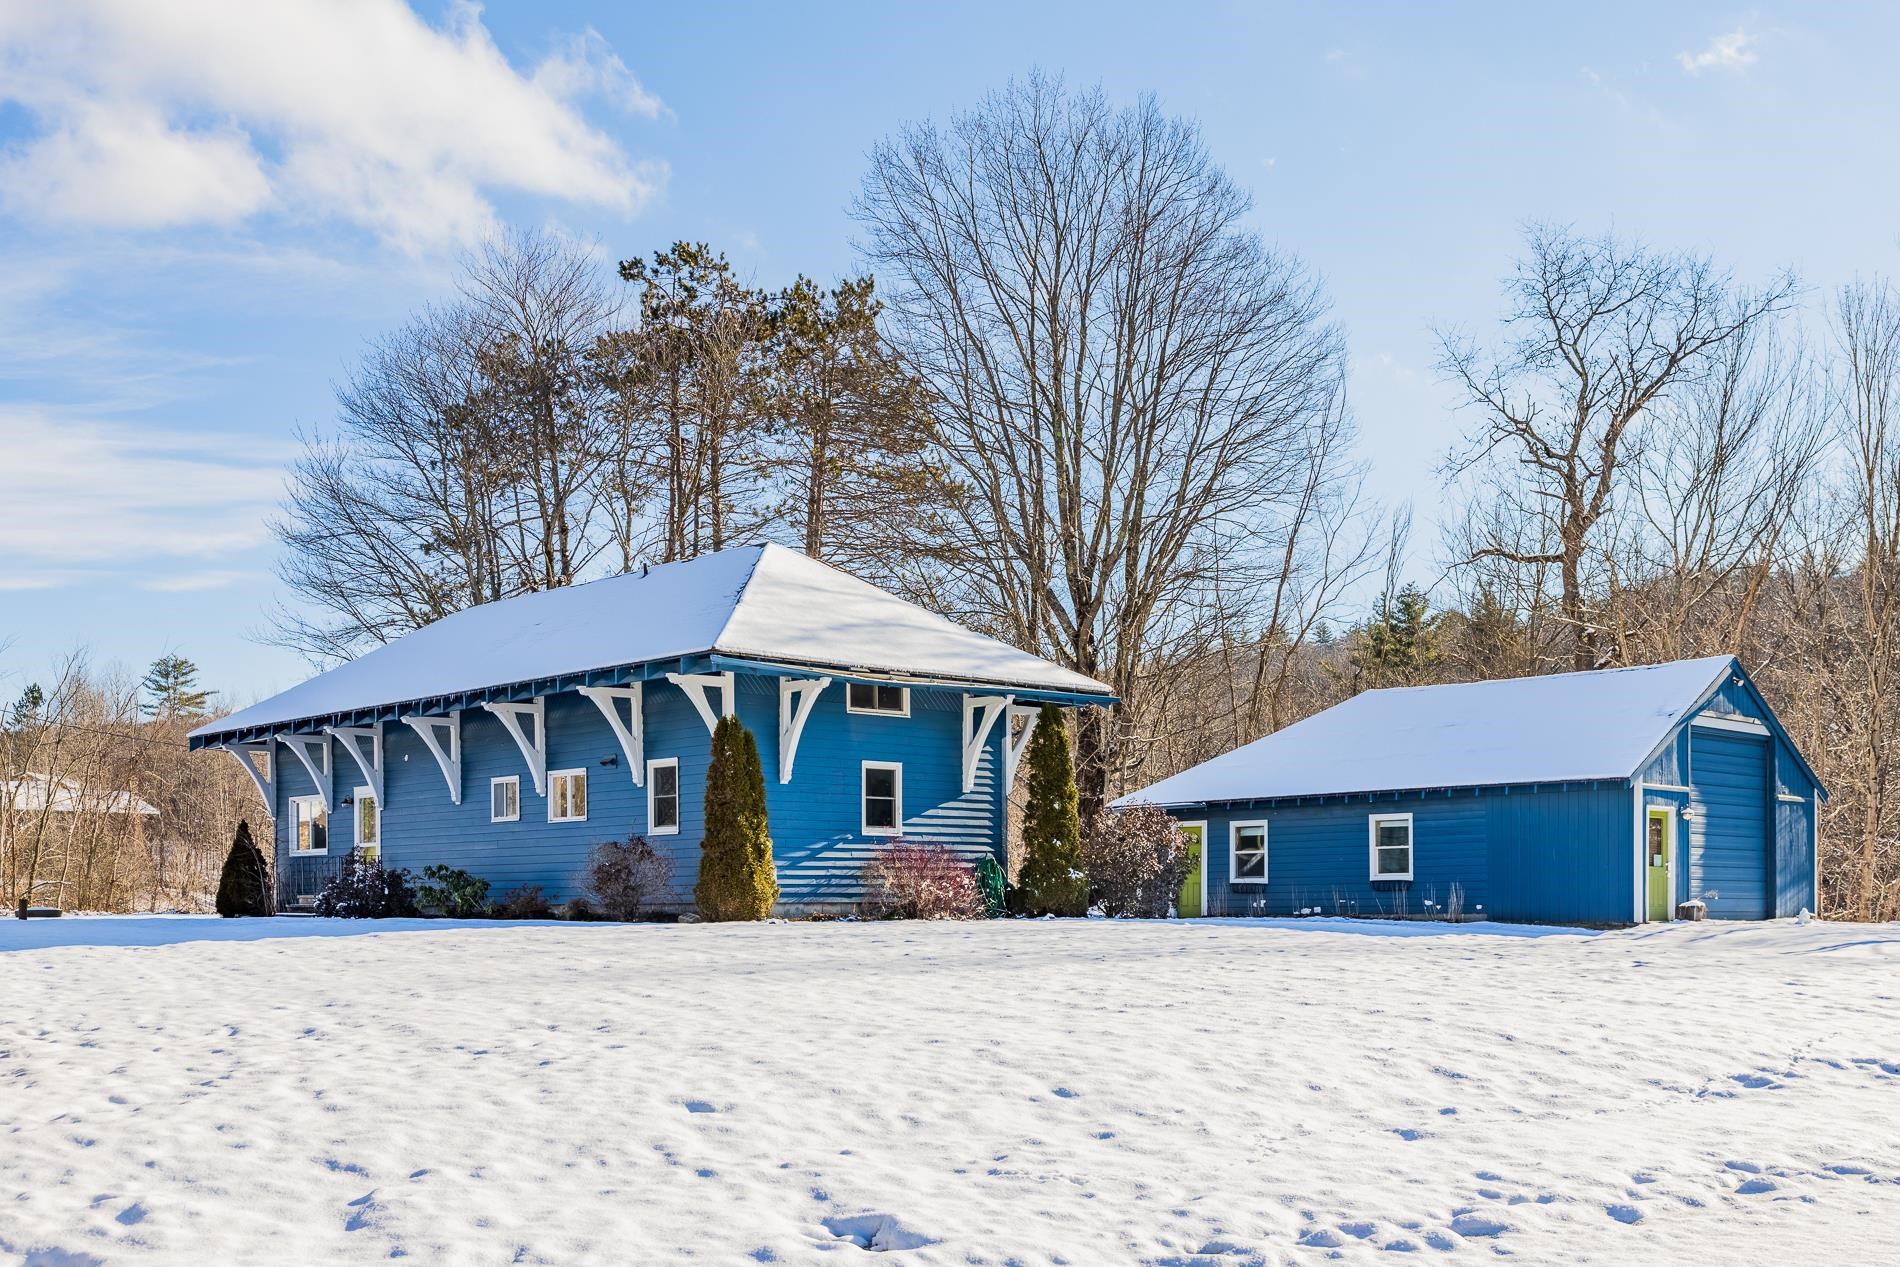 MOUNT HOLLY VT Homes for sale